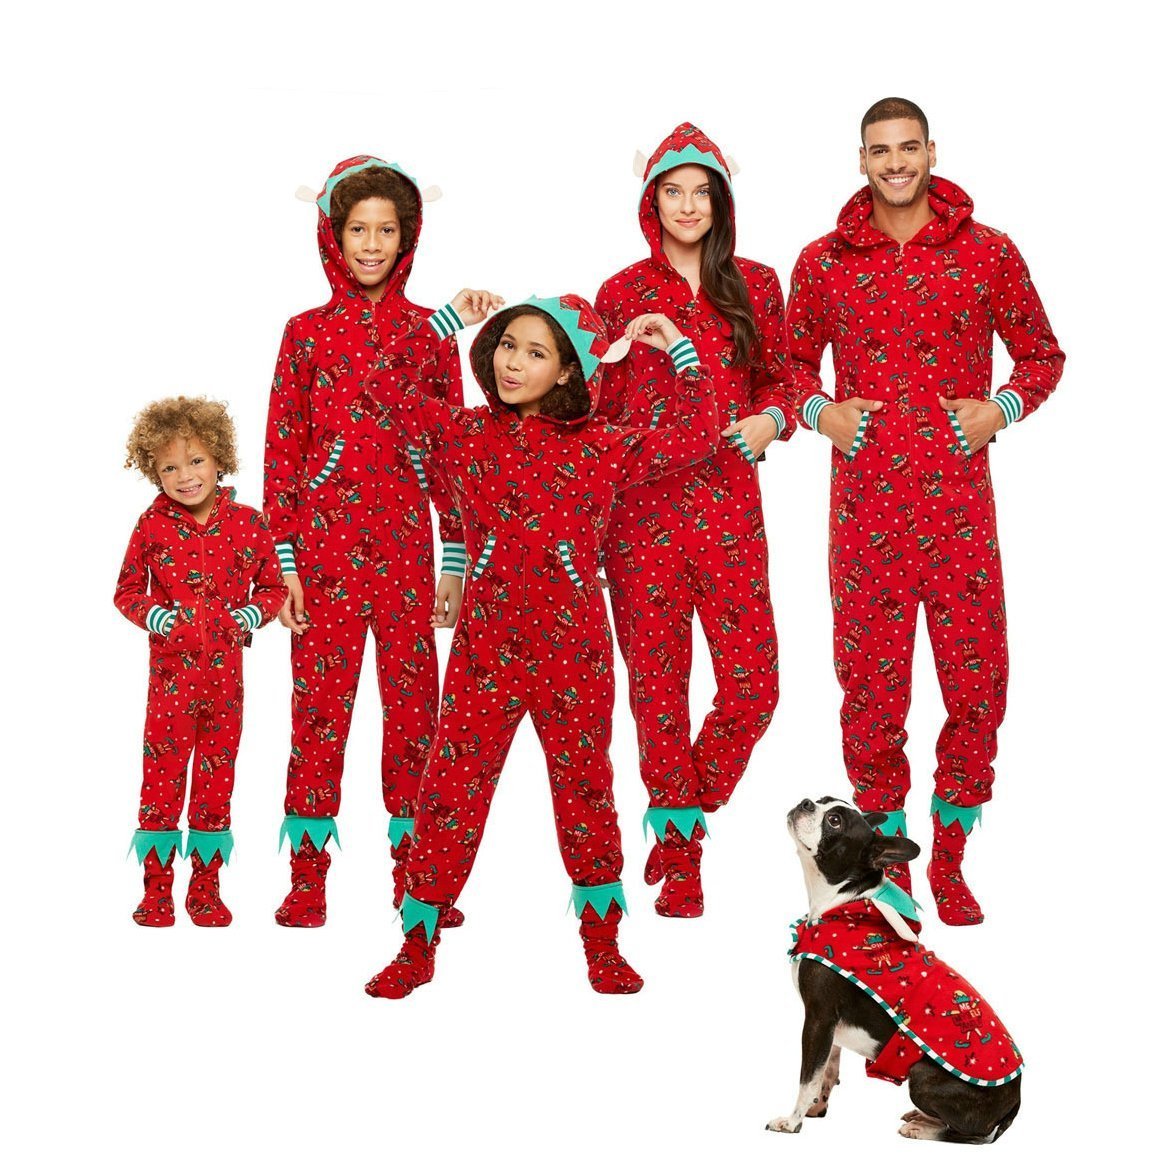 Hot Printed Christmas Family Matching Pajamas Sets Hoodie Onesies for Dad Baby Mom Children Me Gifts 2022